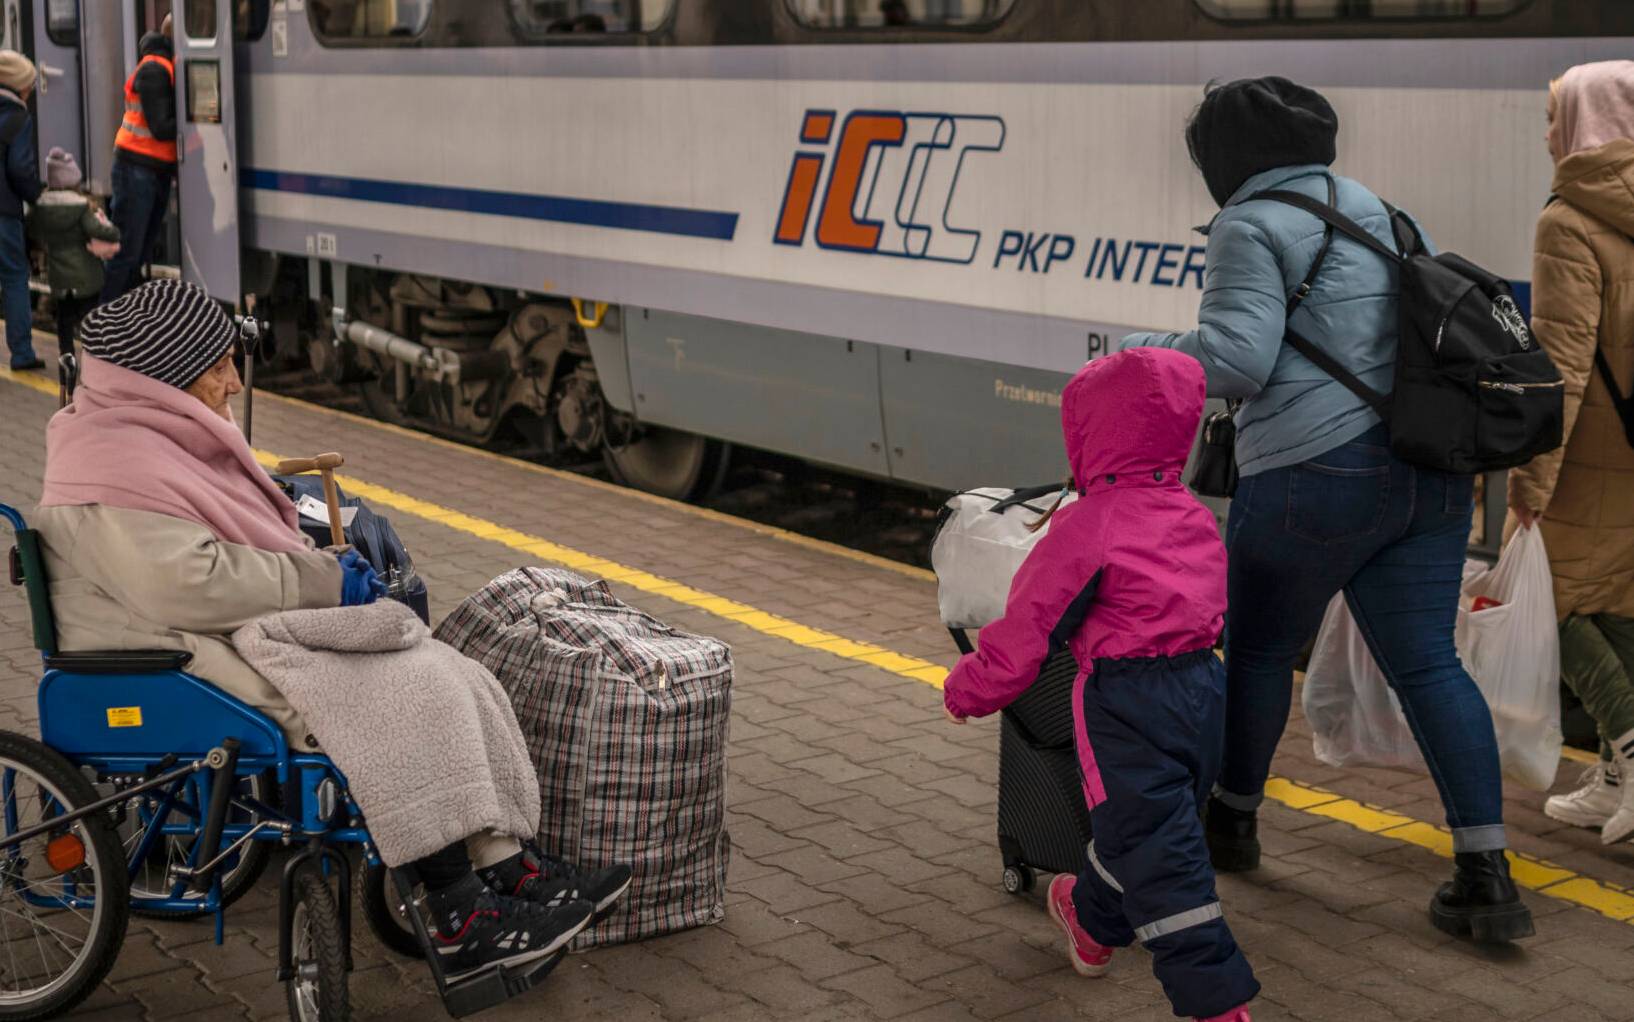 A Ukrainian evacuee in a wheelchair waits to board a train en route to Warsaw at the rail station in Przemysl, near the Polish-Ukrainian border, on March 29, 2022, on the 34th day of the Russian invasion of Ukraine. - Ukraine is calling for an "international agreement" to guarantee its security, which would be signed by several guarantor countries, said on March 29, 2022 the Ukrainian chief negotiator after several hours of Russian-Ukrainian talks in Istanbul. (Photo by Angelos Tzortzinis / AFP)